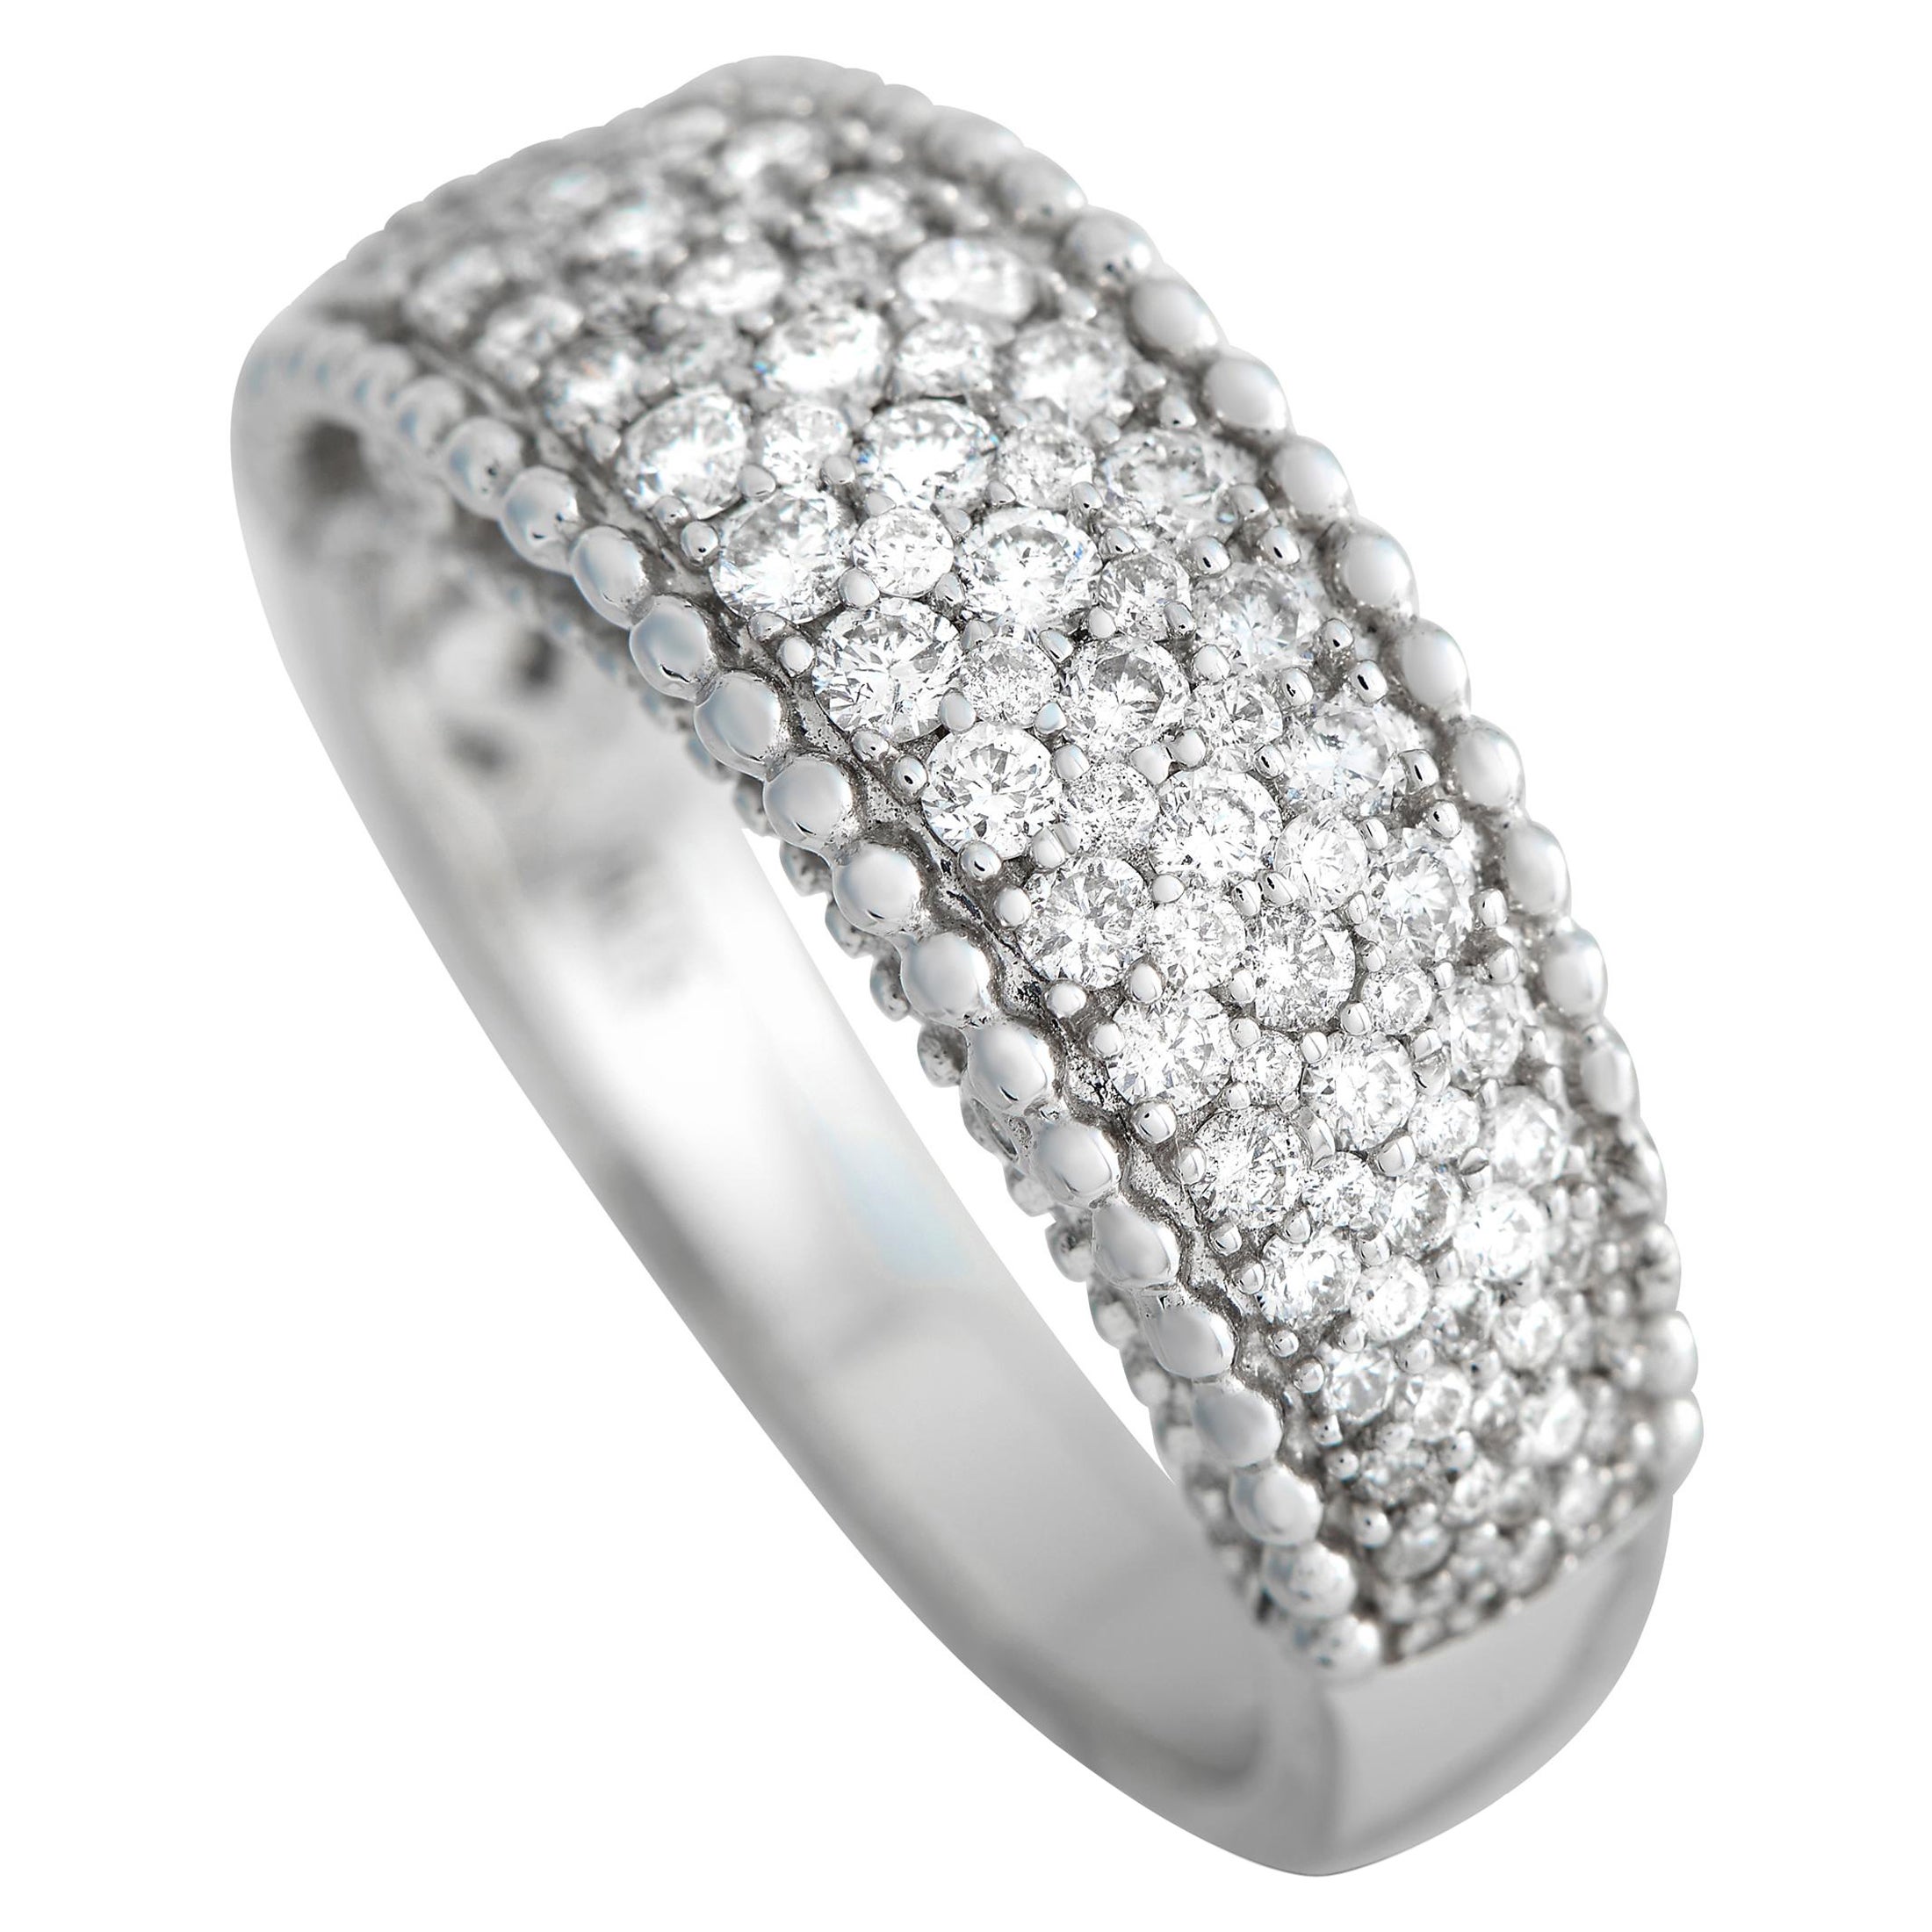 LB Exclusive 14K White Gold 1.0ct Diamond Ring For Sale